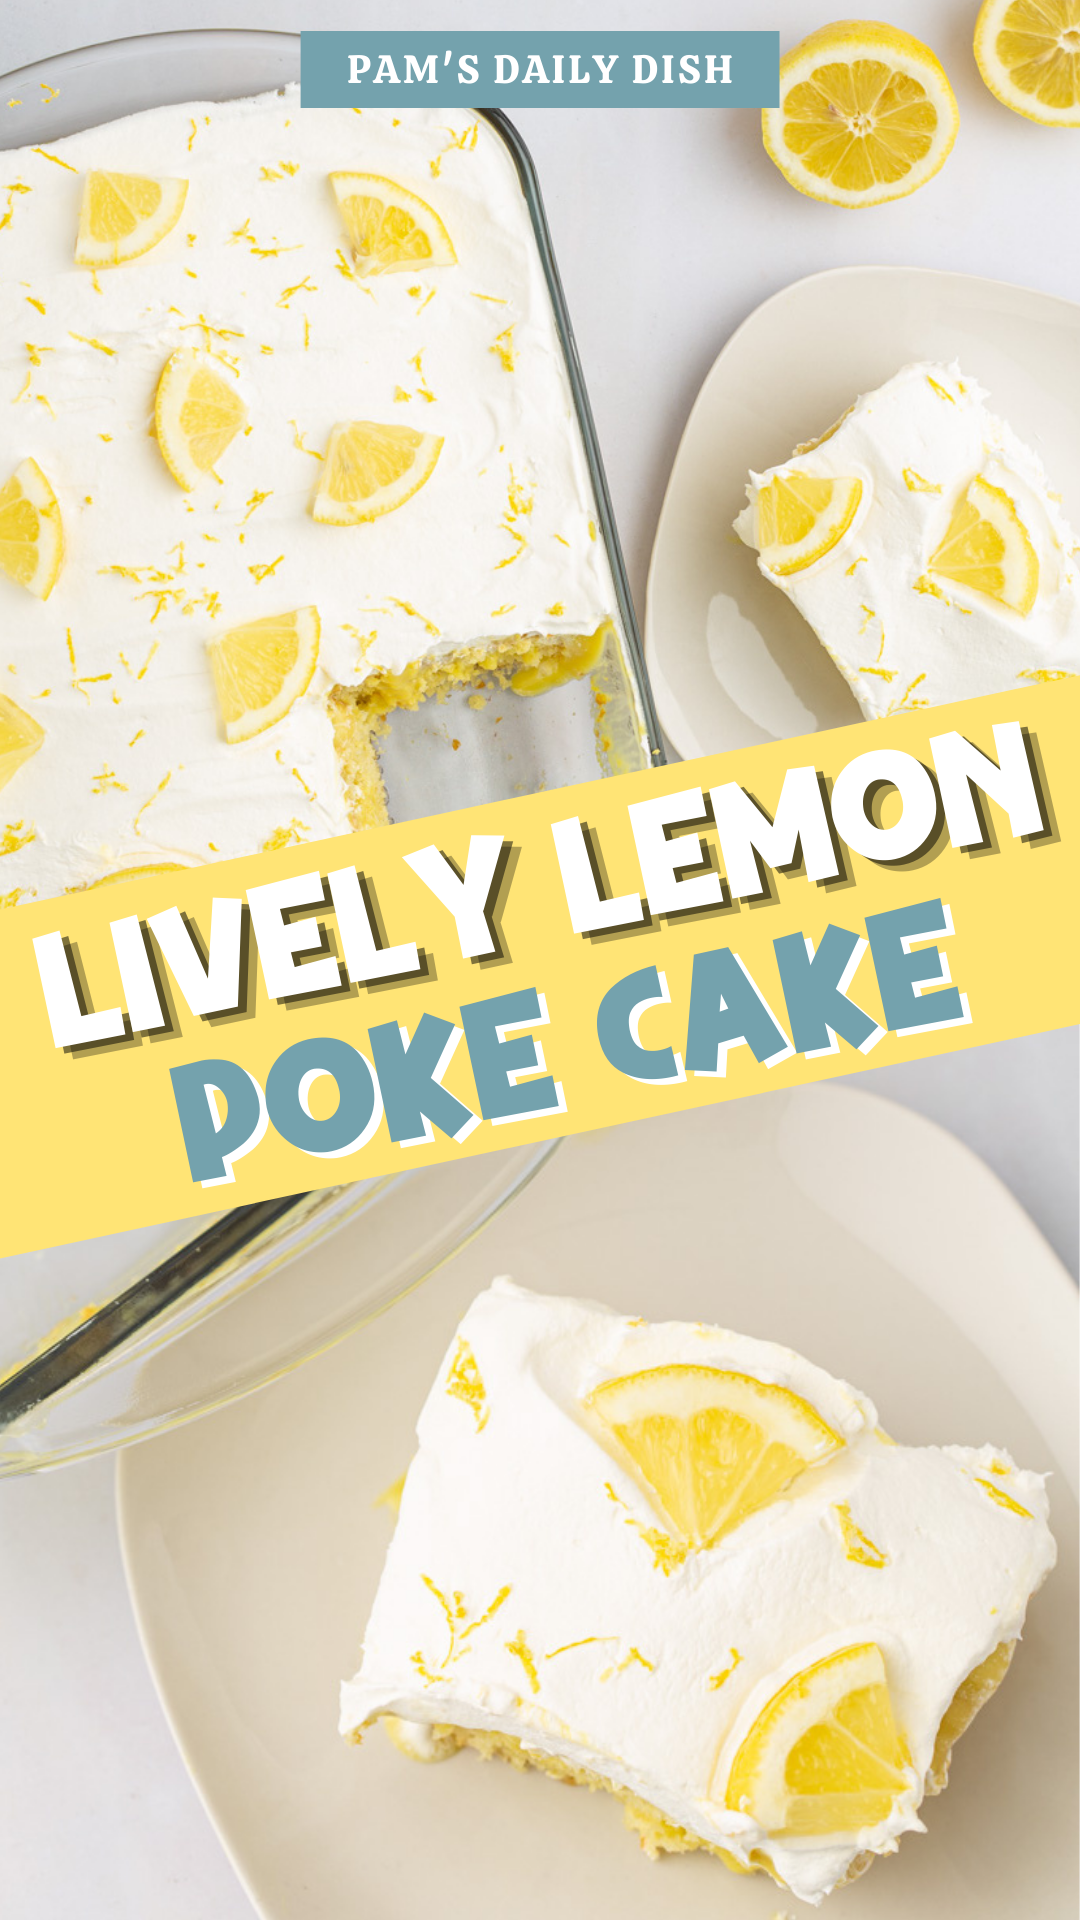 This Lively Lemon Pudding Poke Cake is an easy dessert recipe you don't want to miss. It's the perfect summer dessert for any party and everybody loves it. Plus, it is super simple to make using your favorite boxed cake mix, lemon pudding, and a handful of other ingredients. If you're looking for something sweet and quick to make, this is the best idea! via @skinnydesserts